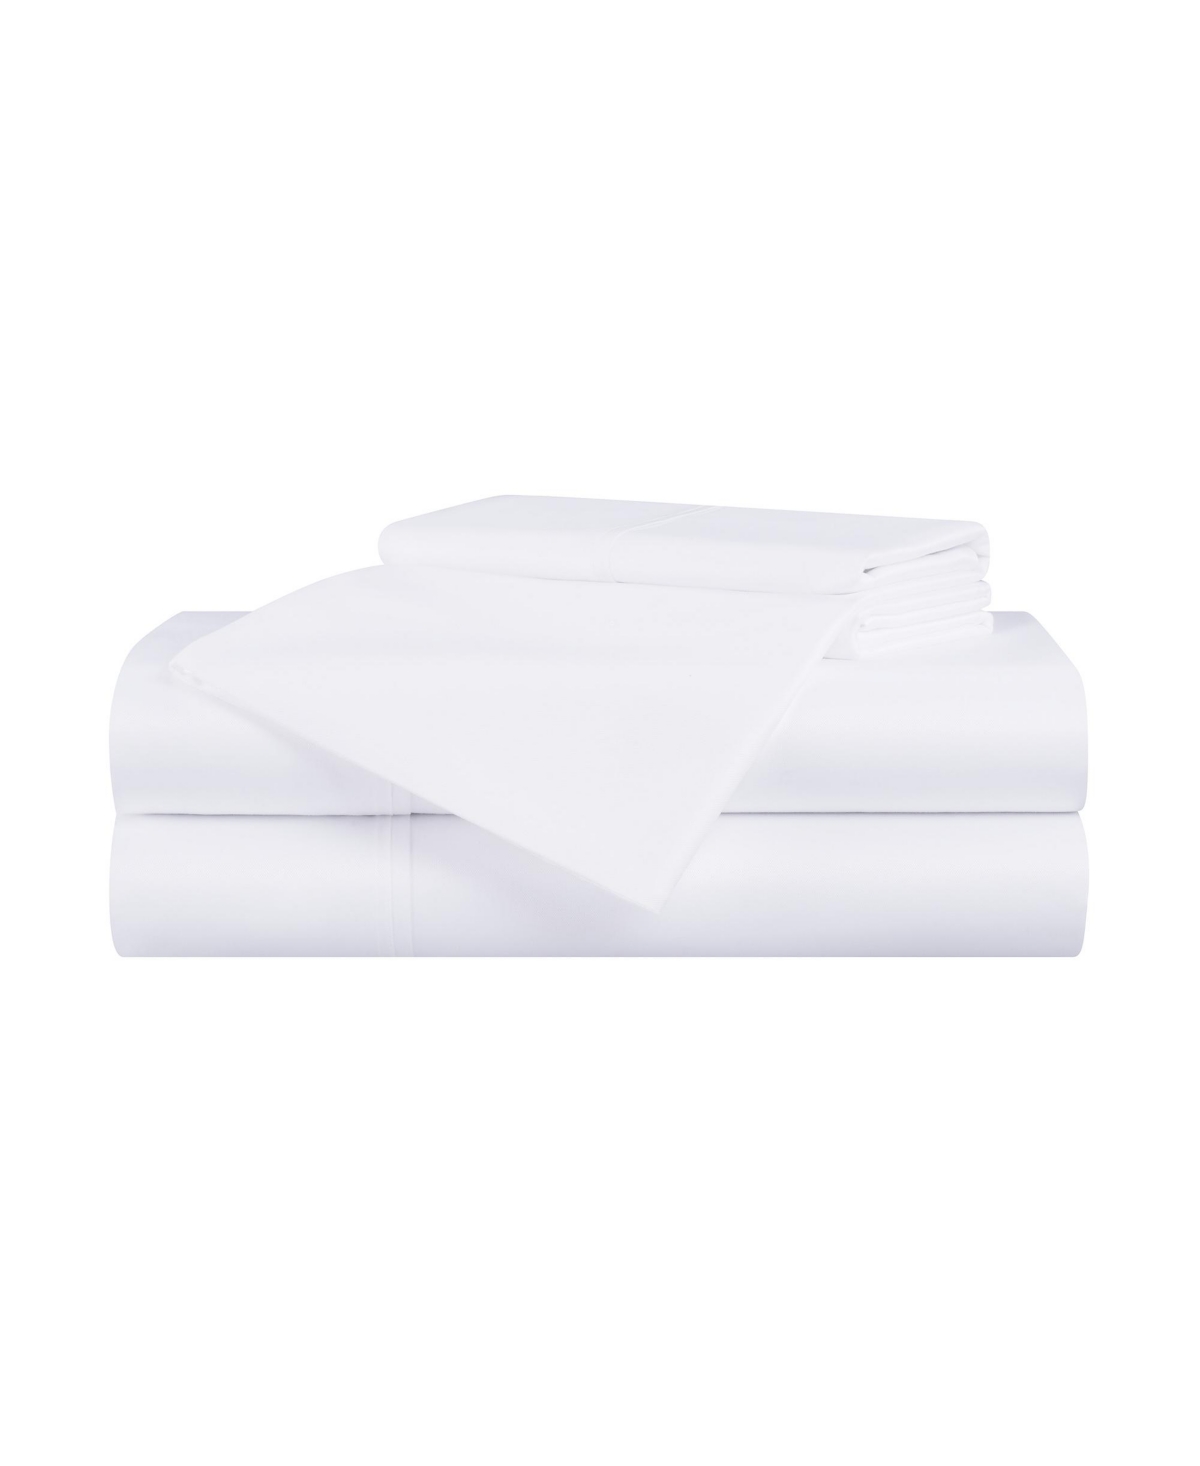 Aston And Arden Rayon From Bamboo Queen Sheet Set, Ultra Silky Luxury Sheets, 1 Flat Sheet, 1 Fitted Sheet, 2 Pillow In White